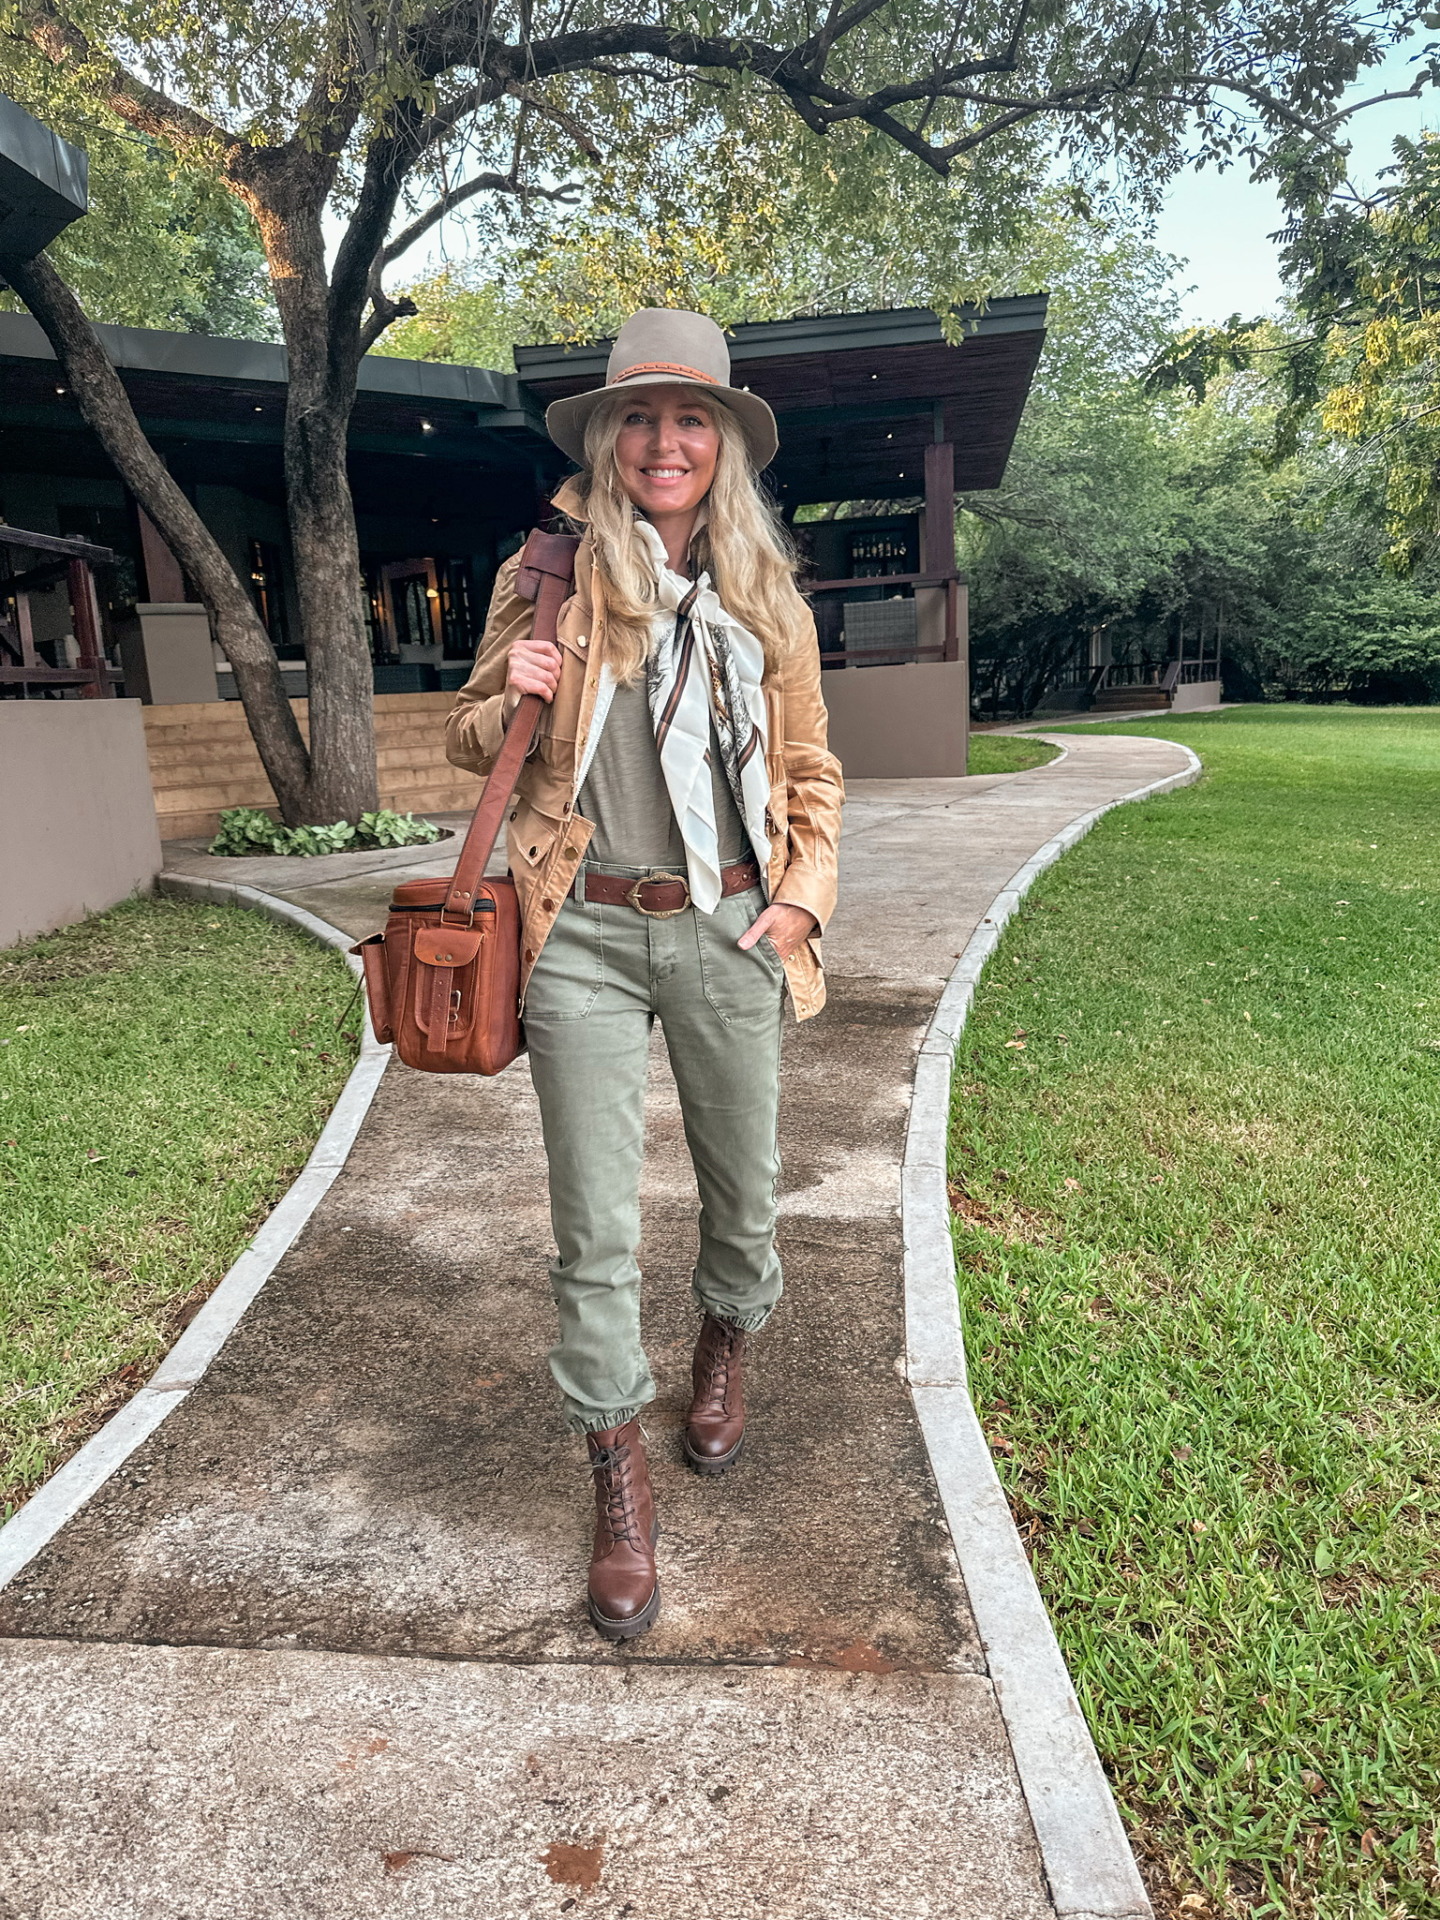 Safari Outfits 2022: What to Pack When You Finally Take That Dream Trip